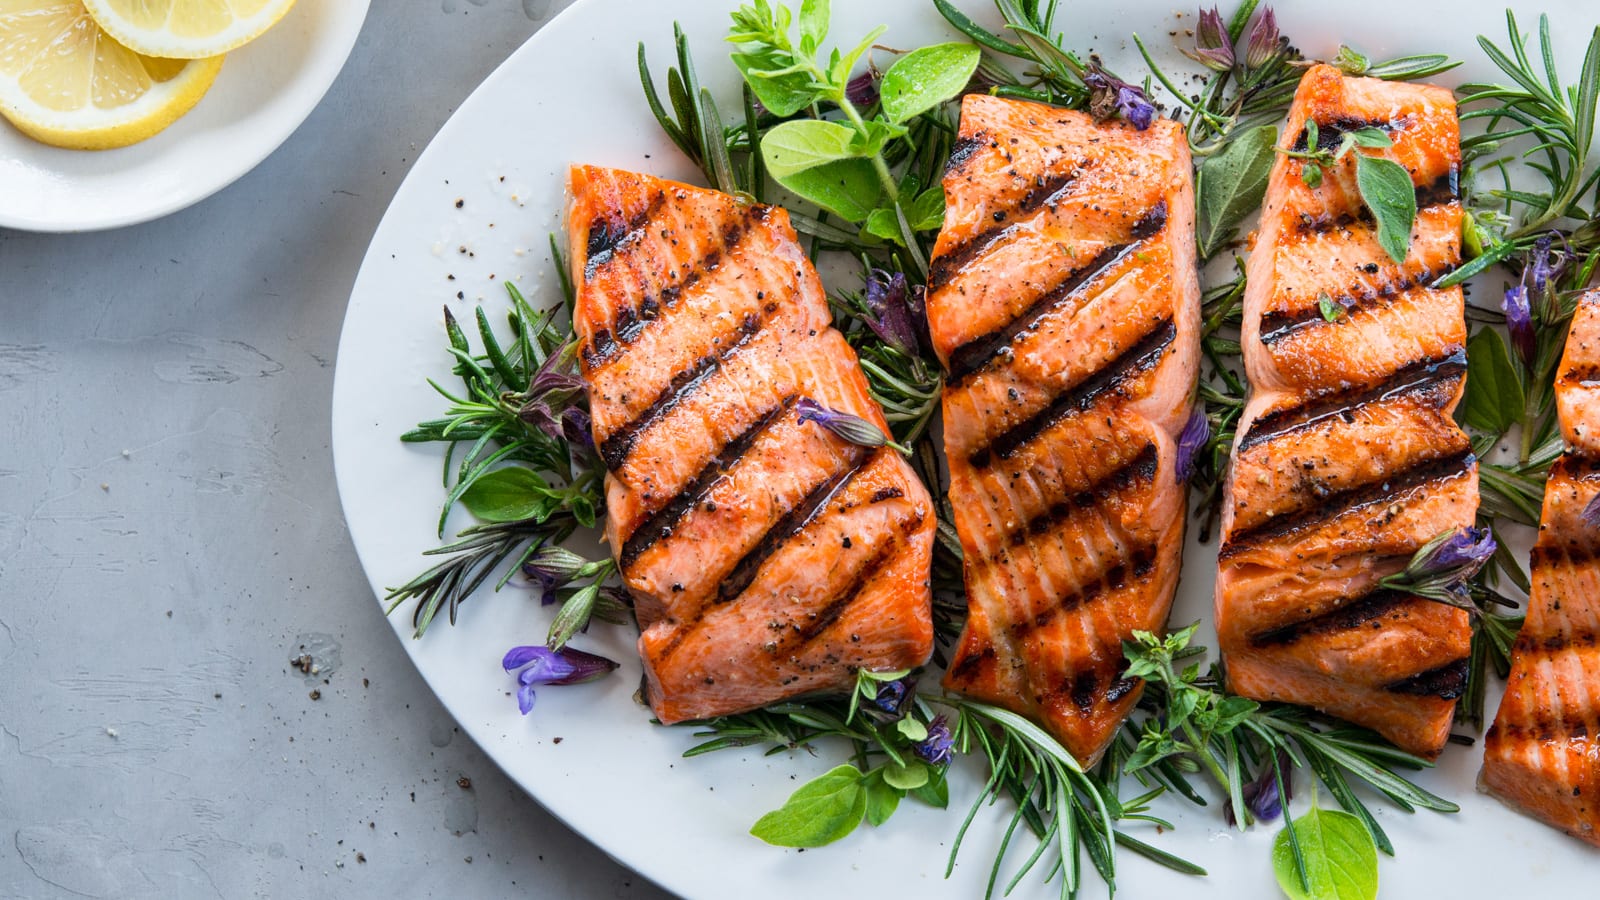 Rosemary Grilled Salmon Recipe Pcc Community Markets,Accent Wall Ideas For Bedroom